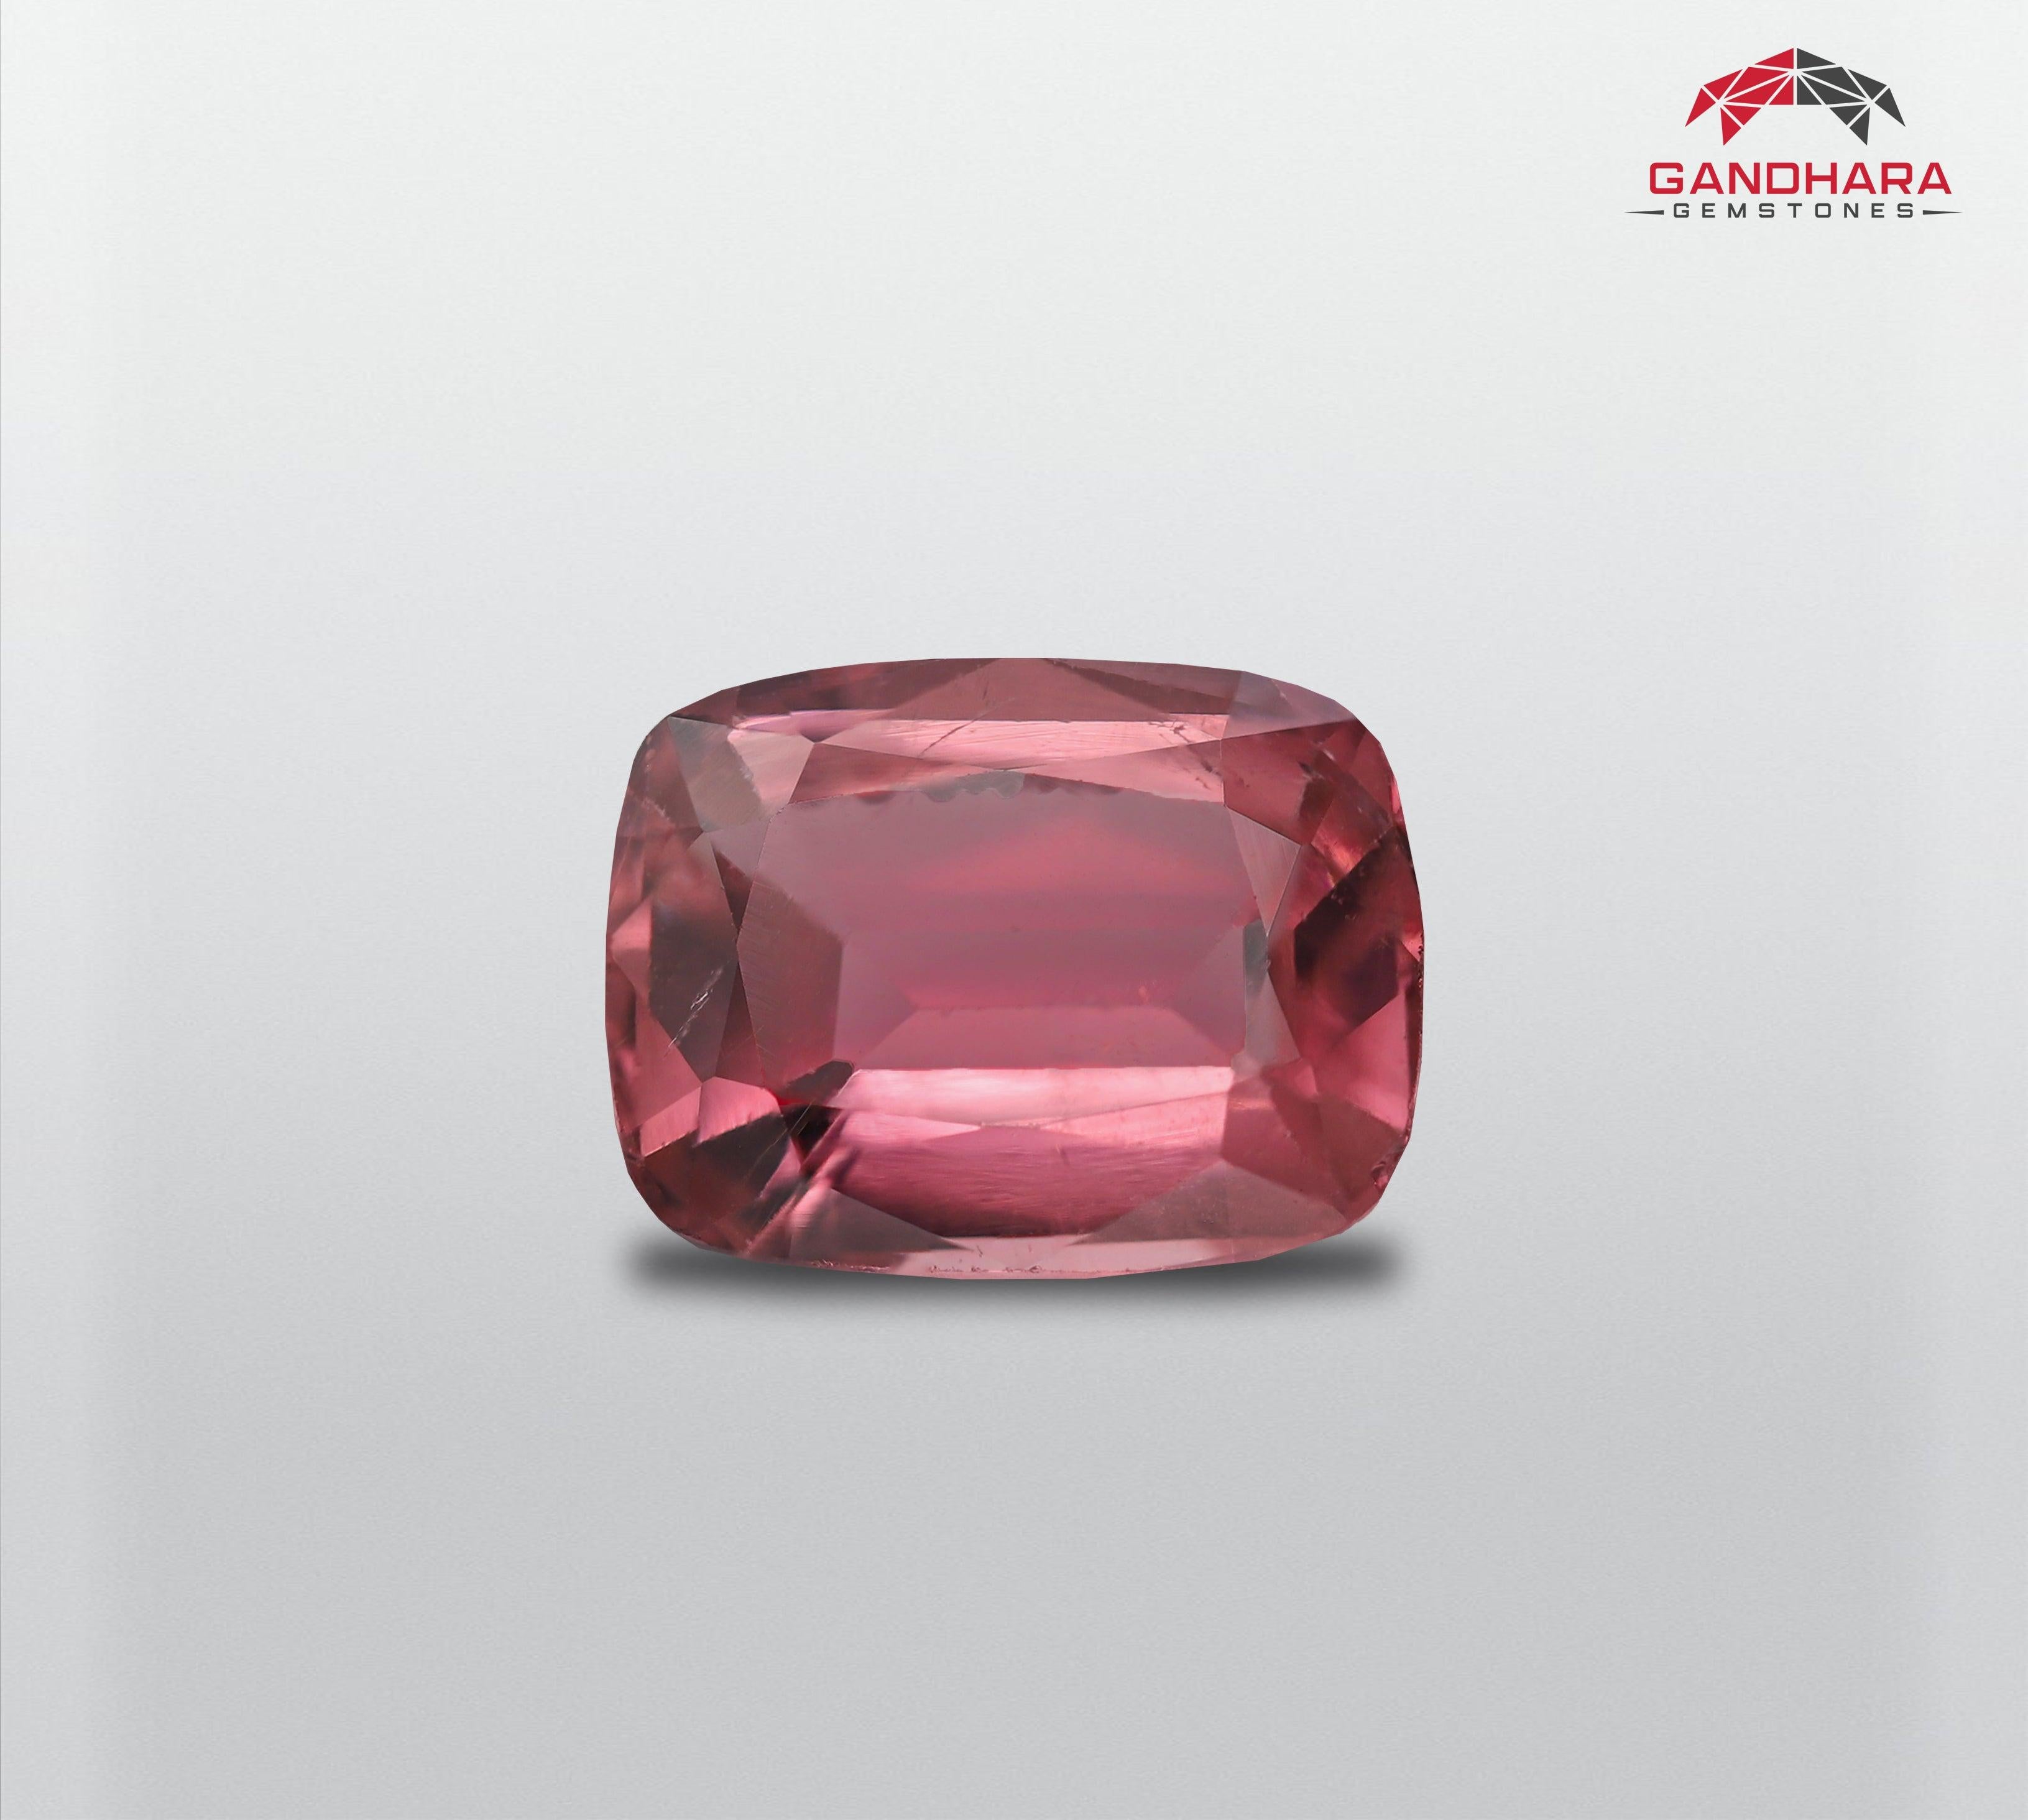 Hot Pink Natural Tourmaline Gemstone of 3.52 carats from Afghanistan has a wonderful cut in a Cushion shape, incredible Pink color. Great brilliance. This gem is  Vvs Clarity.

Product Information
GEMSTONE TYPE:	Hot Pink Natural Tourmaline